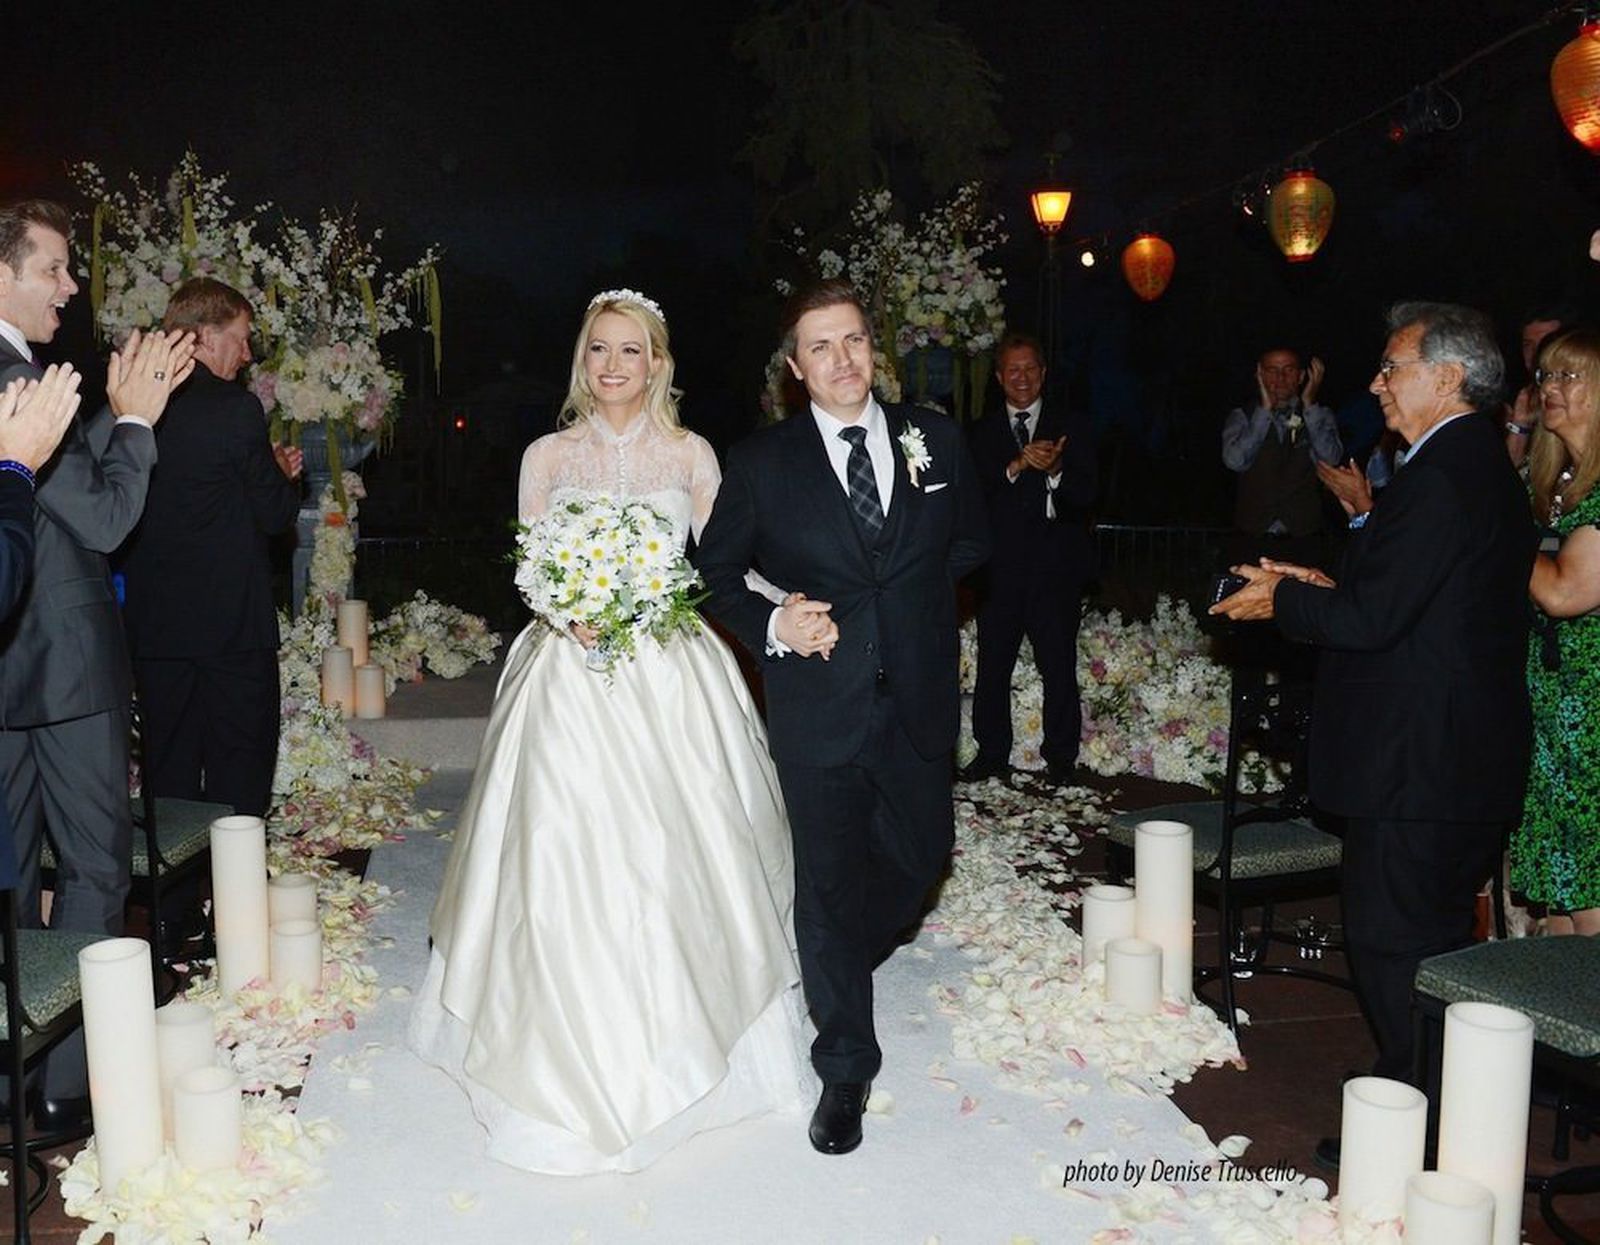 Get Up Close and Personal with Holly Madison's Wedding